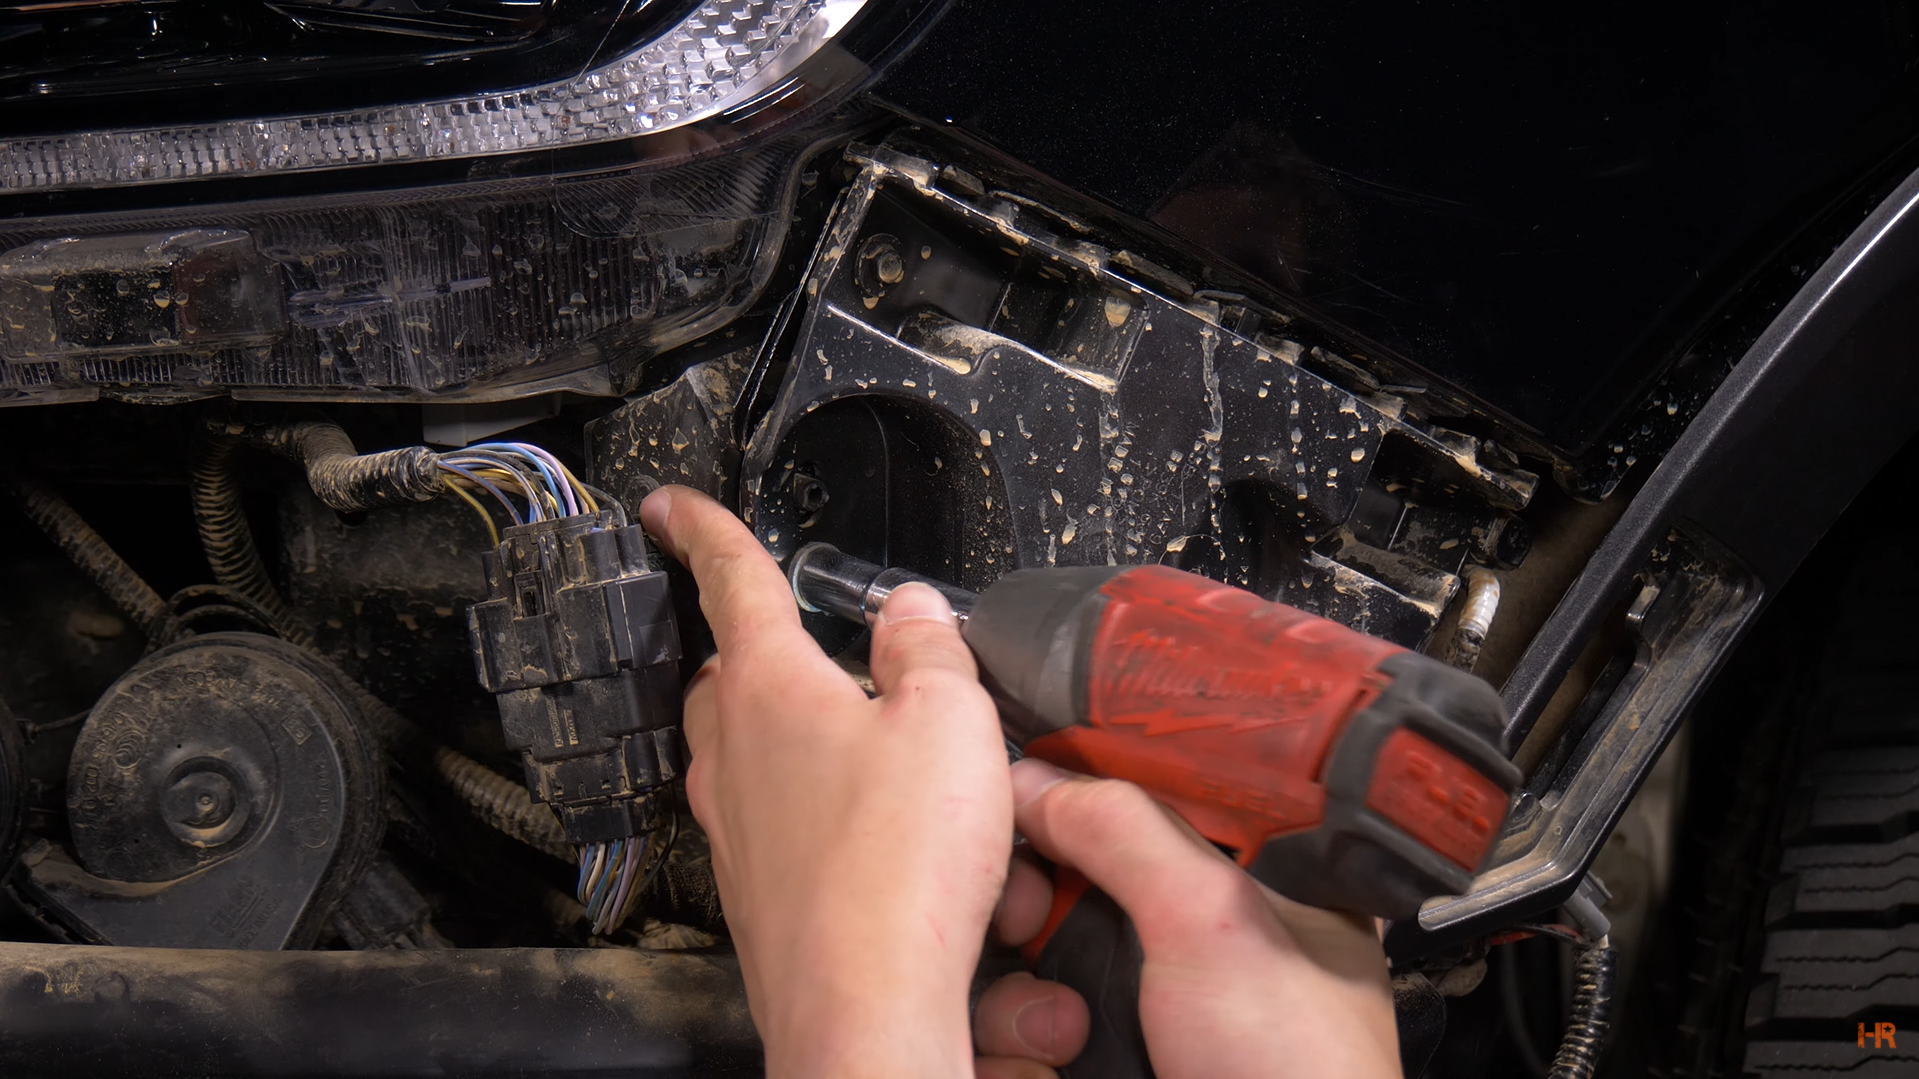 A man works on instlalling the Morimoto XB LED Headlights on the 2019+ Ford Ranger.